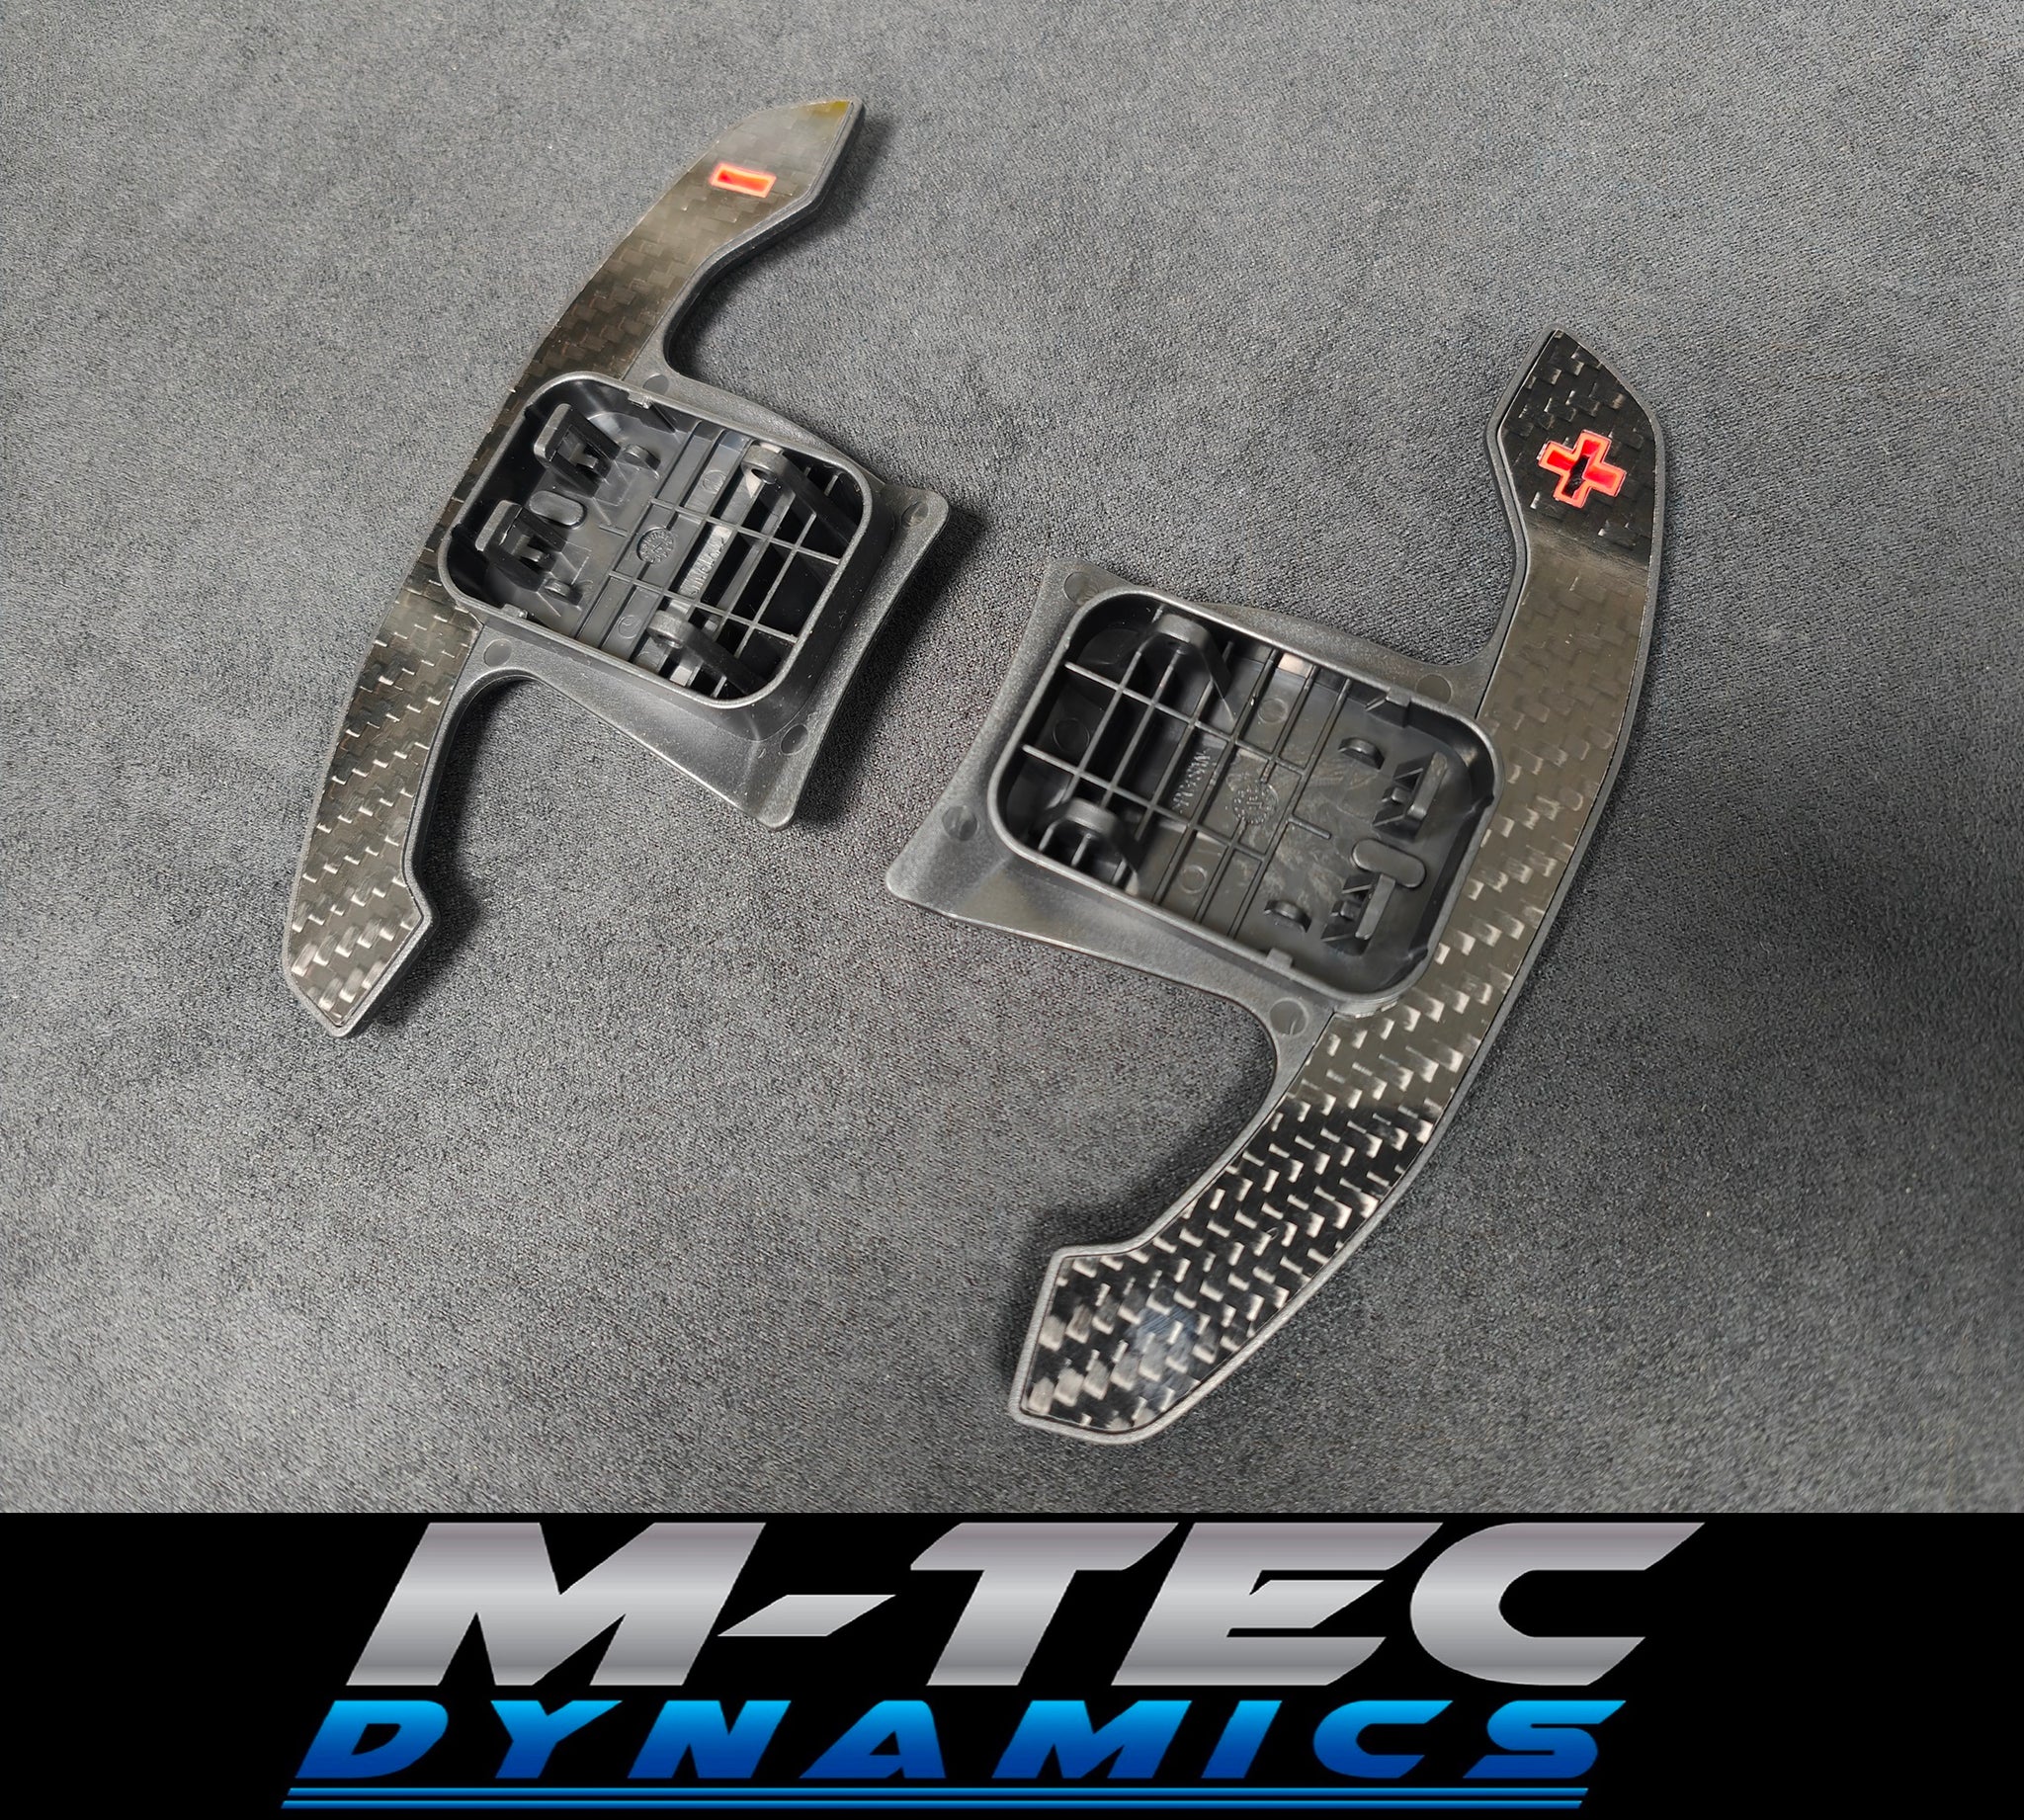 BMW F/G-SERIES BMW CARBON FIBRE STYLE RED STEERING WHEEL PADDLE SHIFTERS - (F80 M3 F82 F83 M4 M2 F30 G20 G80)